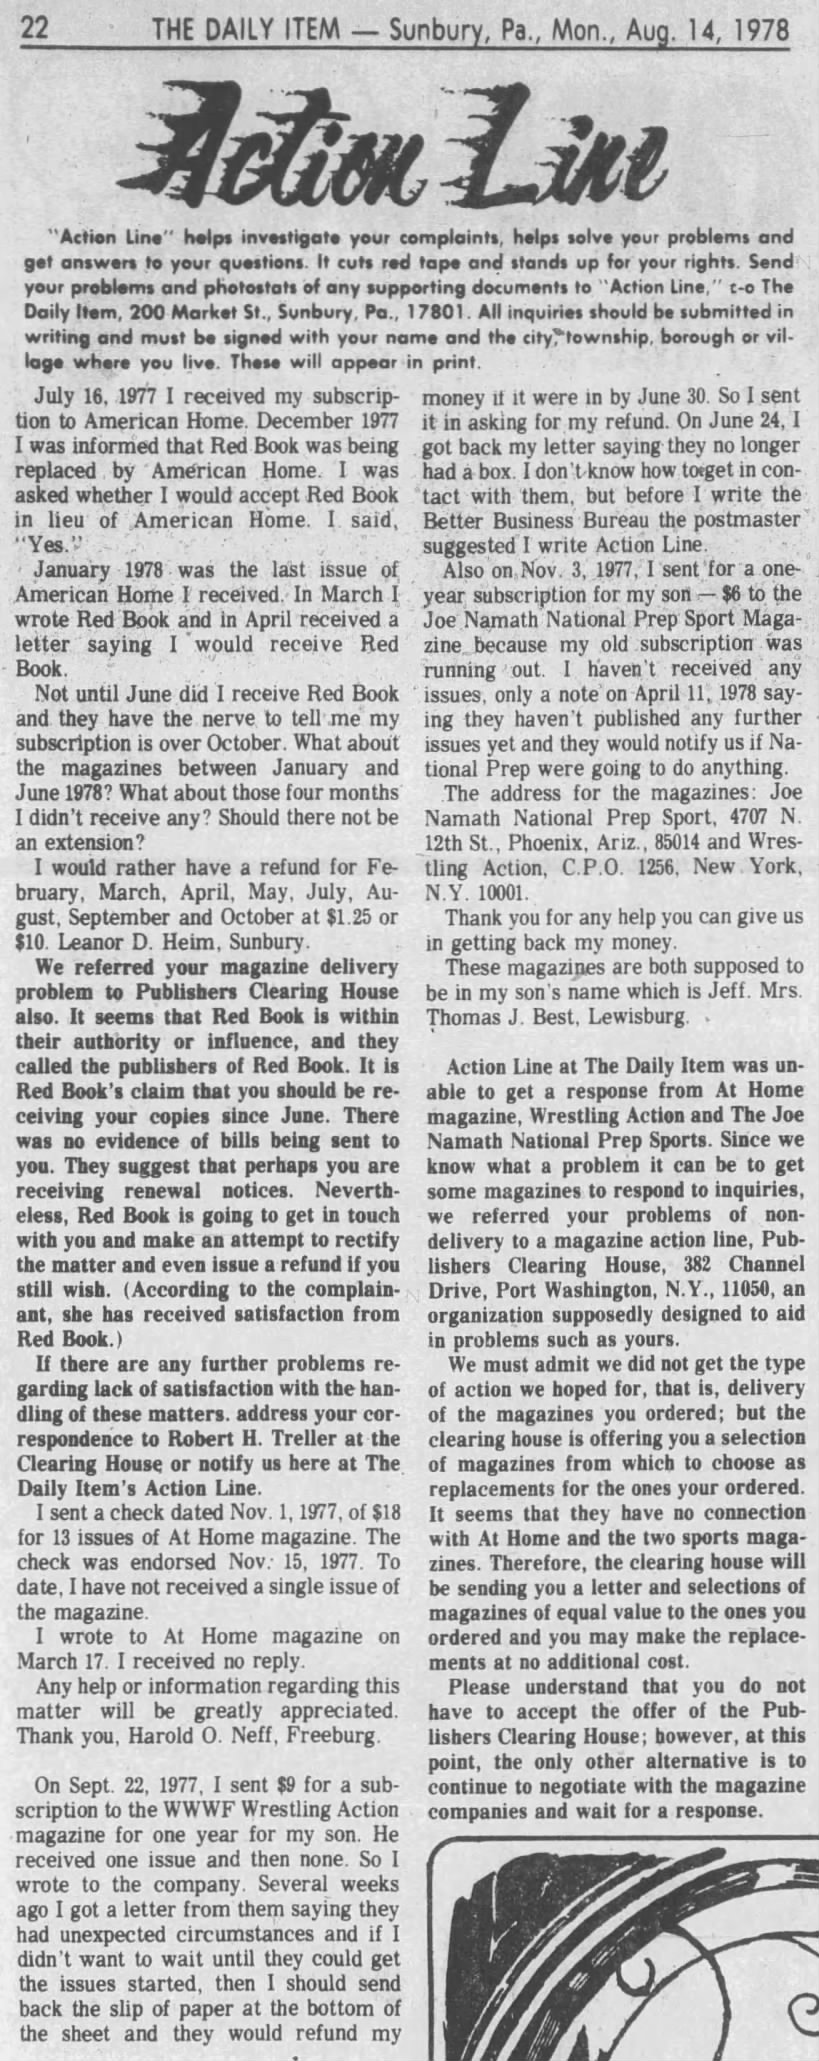 Action Line with WWF Wrestling Action subscription complaint (Sunbury Daily Item 8/14/1978)